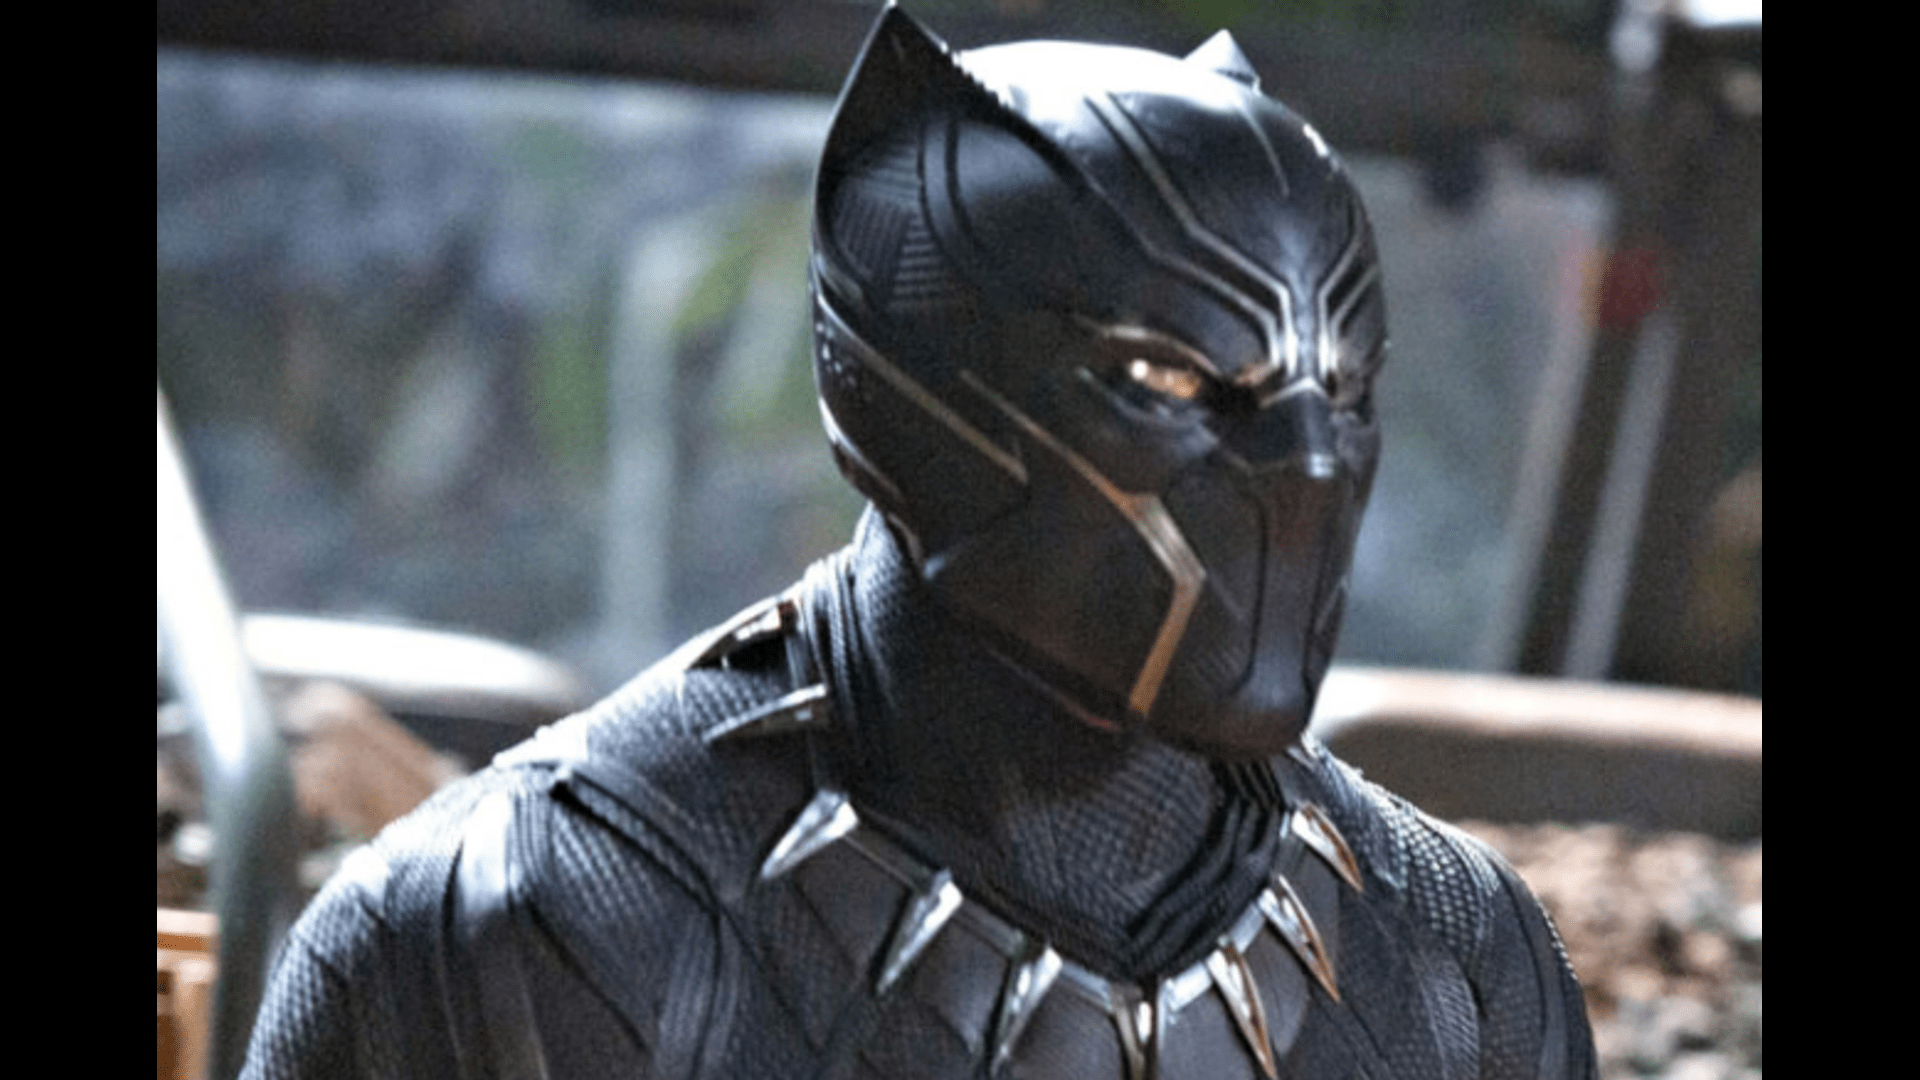 ”black-panther-wakanda-forever-wraps-up-filming-in-puerto-rico”